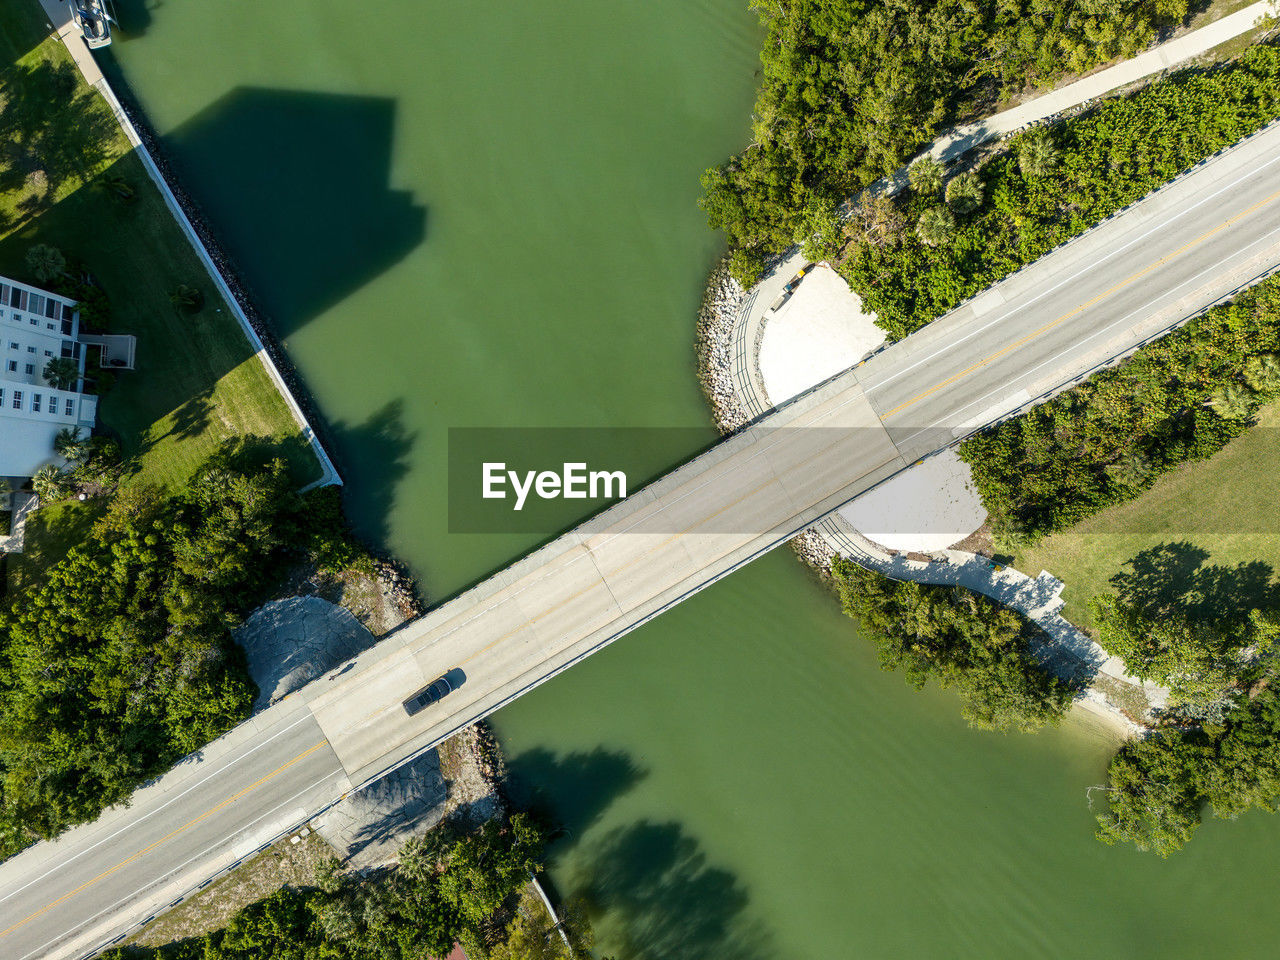 aerial photography, water, plant, nature, aerial view, high angle view, tree, green, no people, environment, day, lake, architecture, outdoors, transportation, built structure, sunlight, land, bird's-eye view, travel, bridge, landscape, environmental conservation